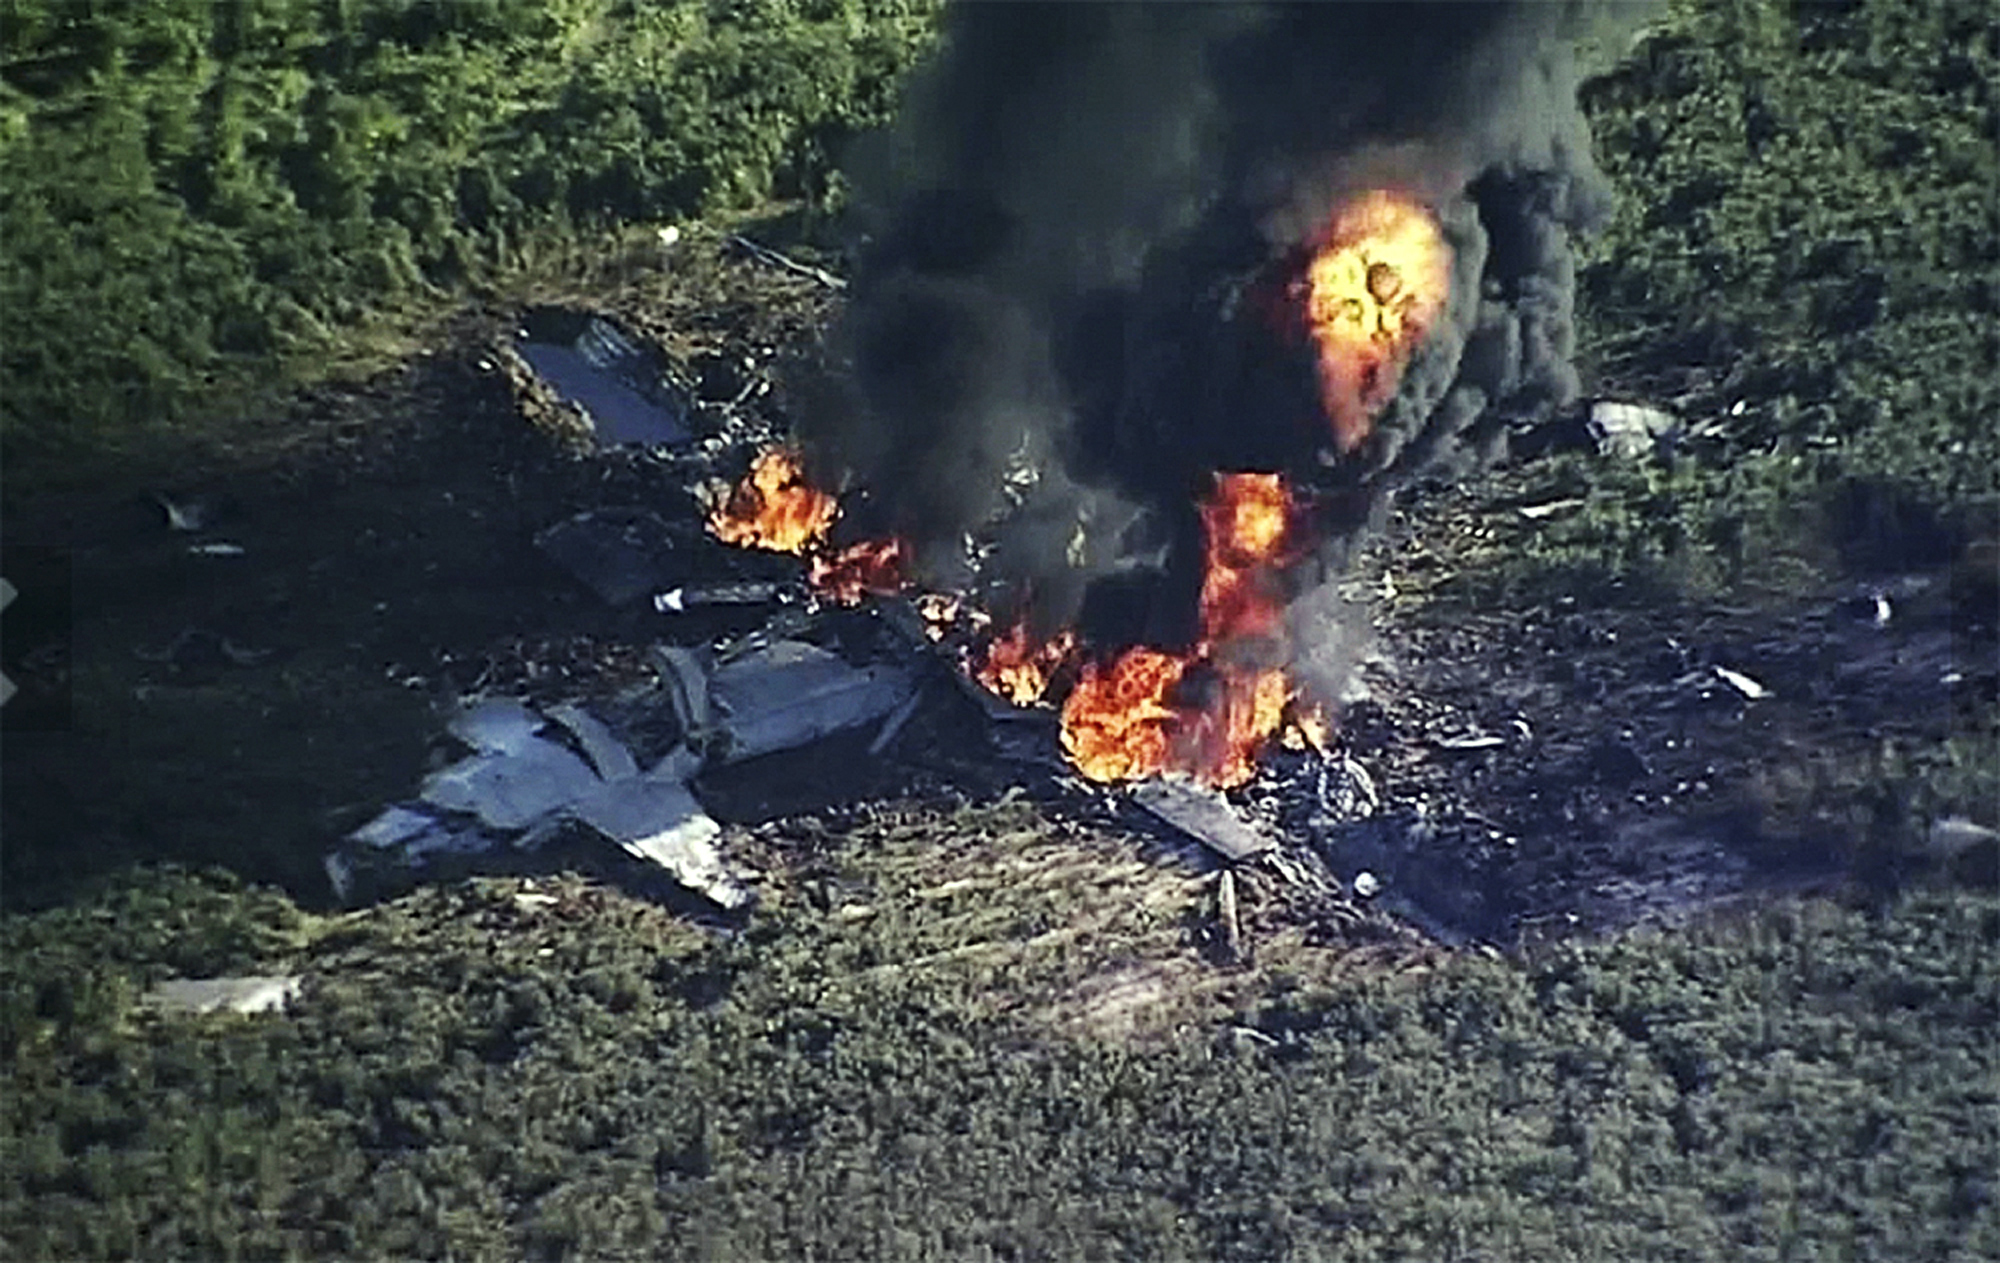 PHOTO: Smoke and flames rise from a military plane that crashed in a farm field, in Itta Bena, Miss., killing several.